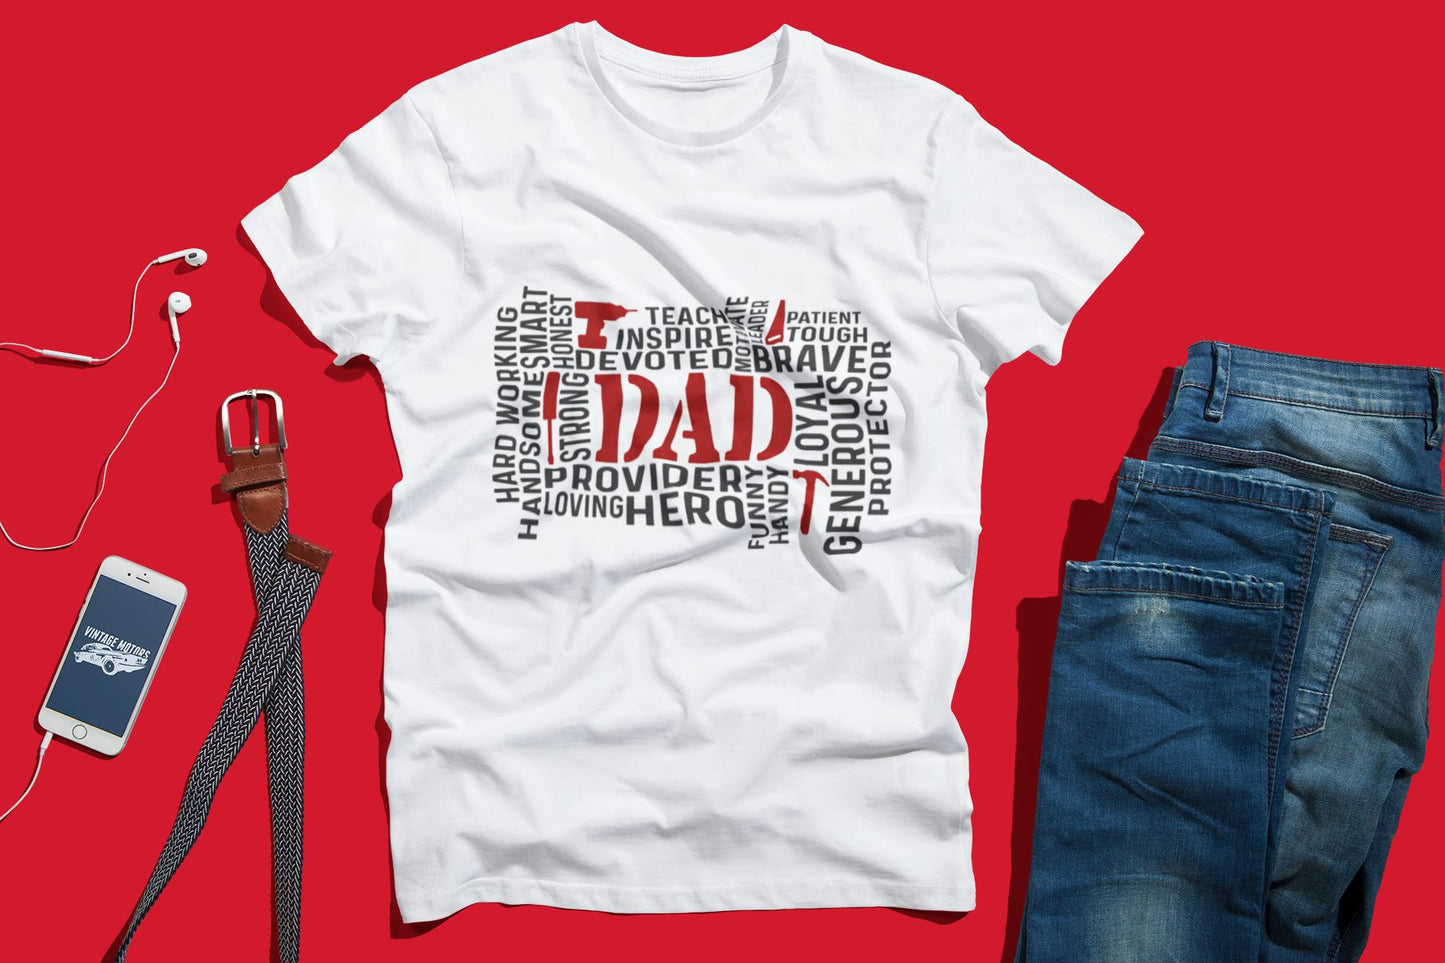 Fatherhood Themed T-Shirts, Father's Day Shirts, Husband, Daddy, Protector, Hero, Best Dad Ever, Dad Jokes B1ack By Design LLC Dad Word Cloud S BLACK